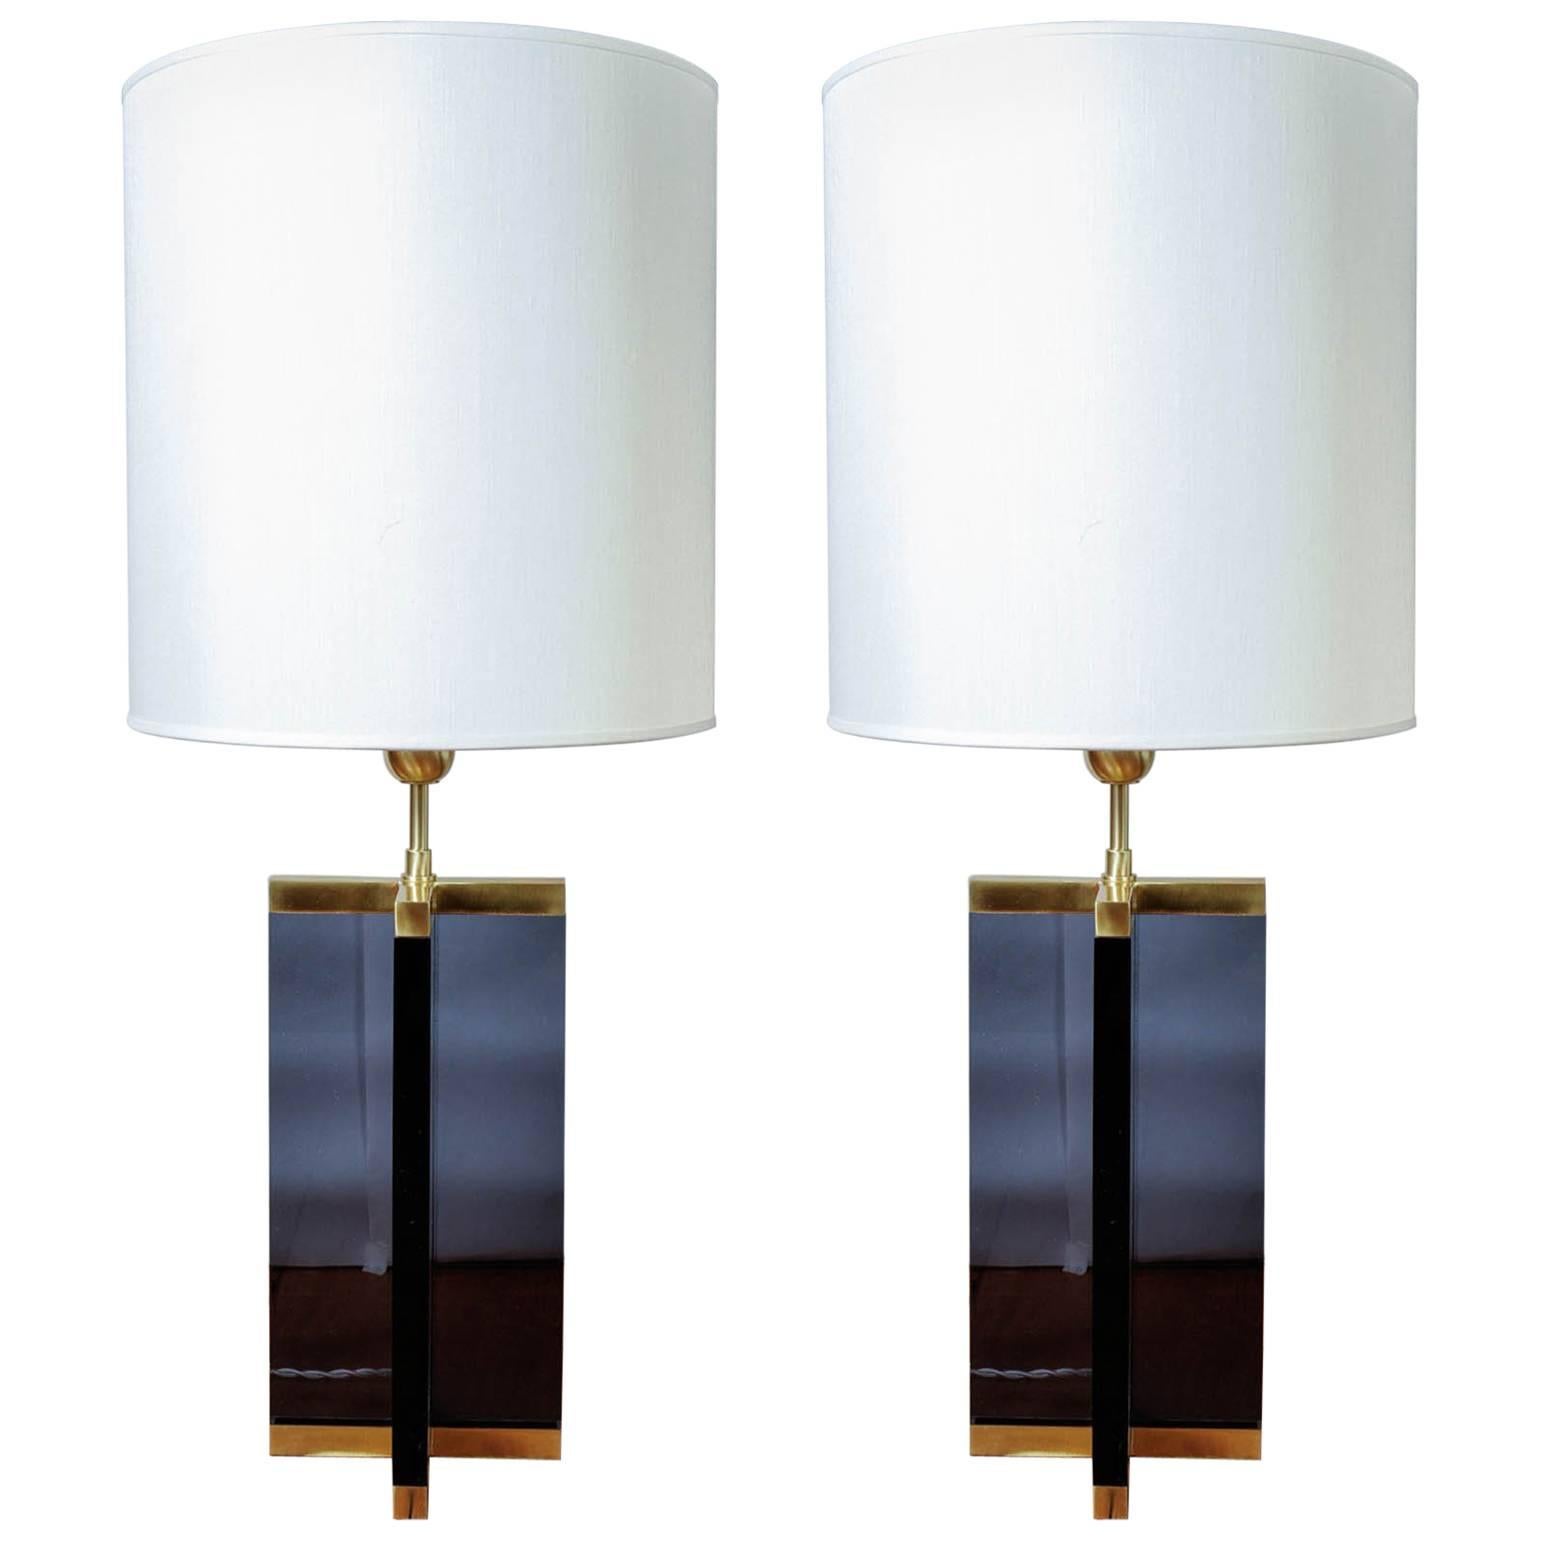 Pair of Cross Table Lamps in Dark Plexiglass and Brass